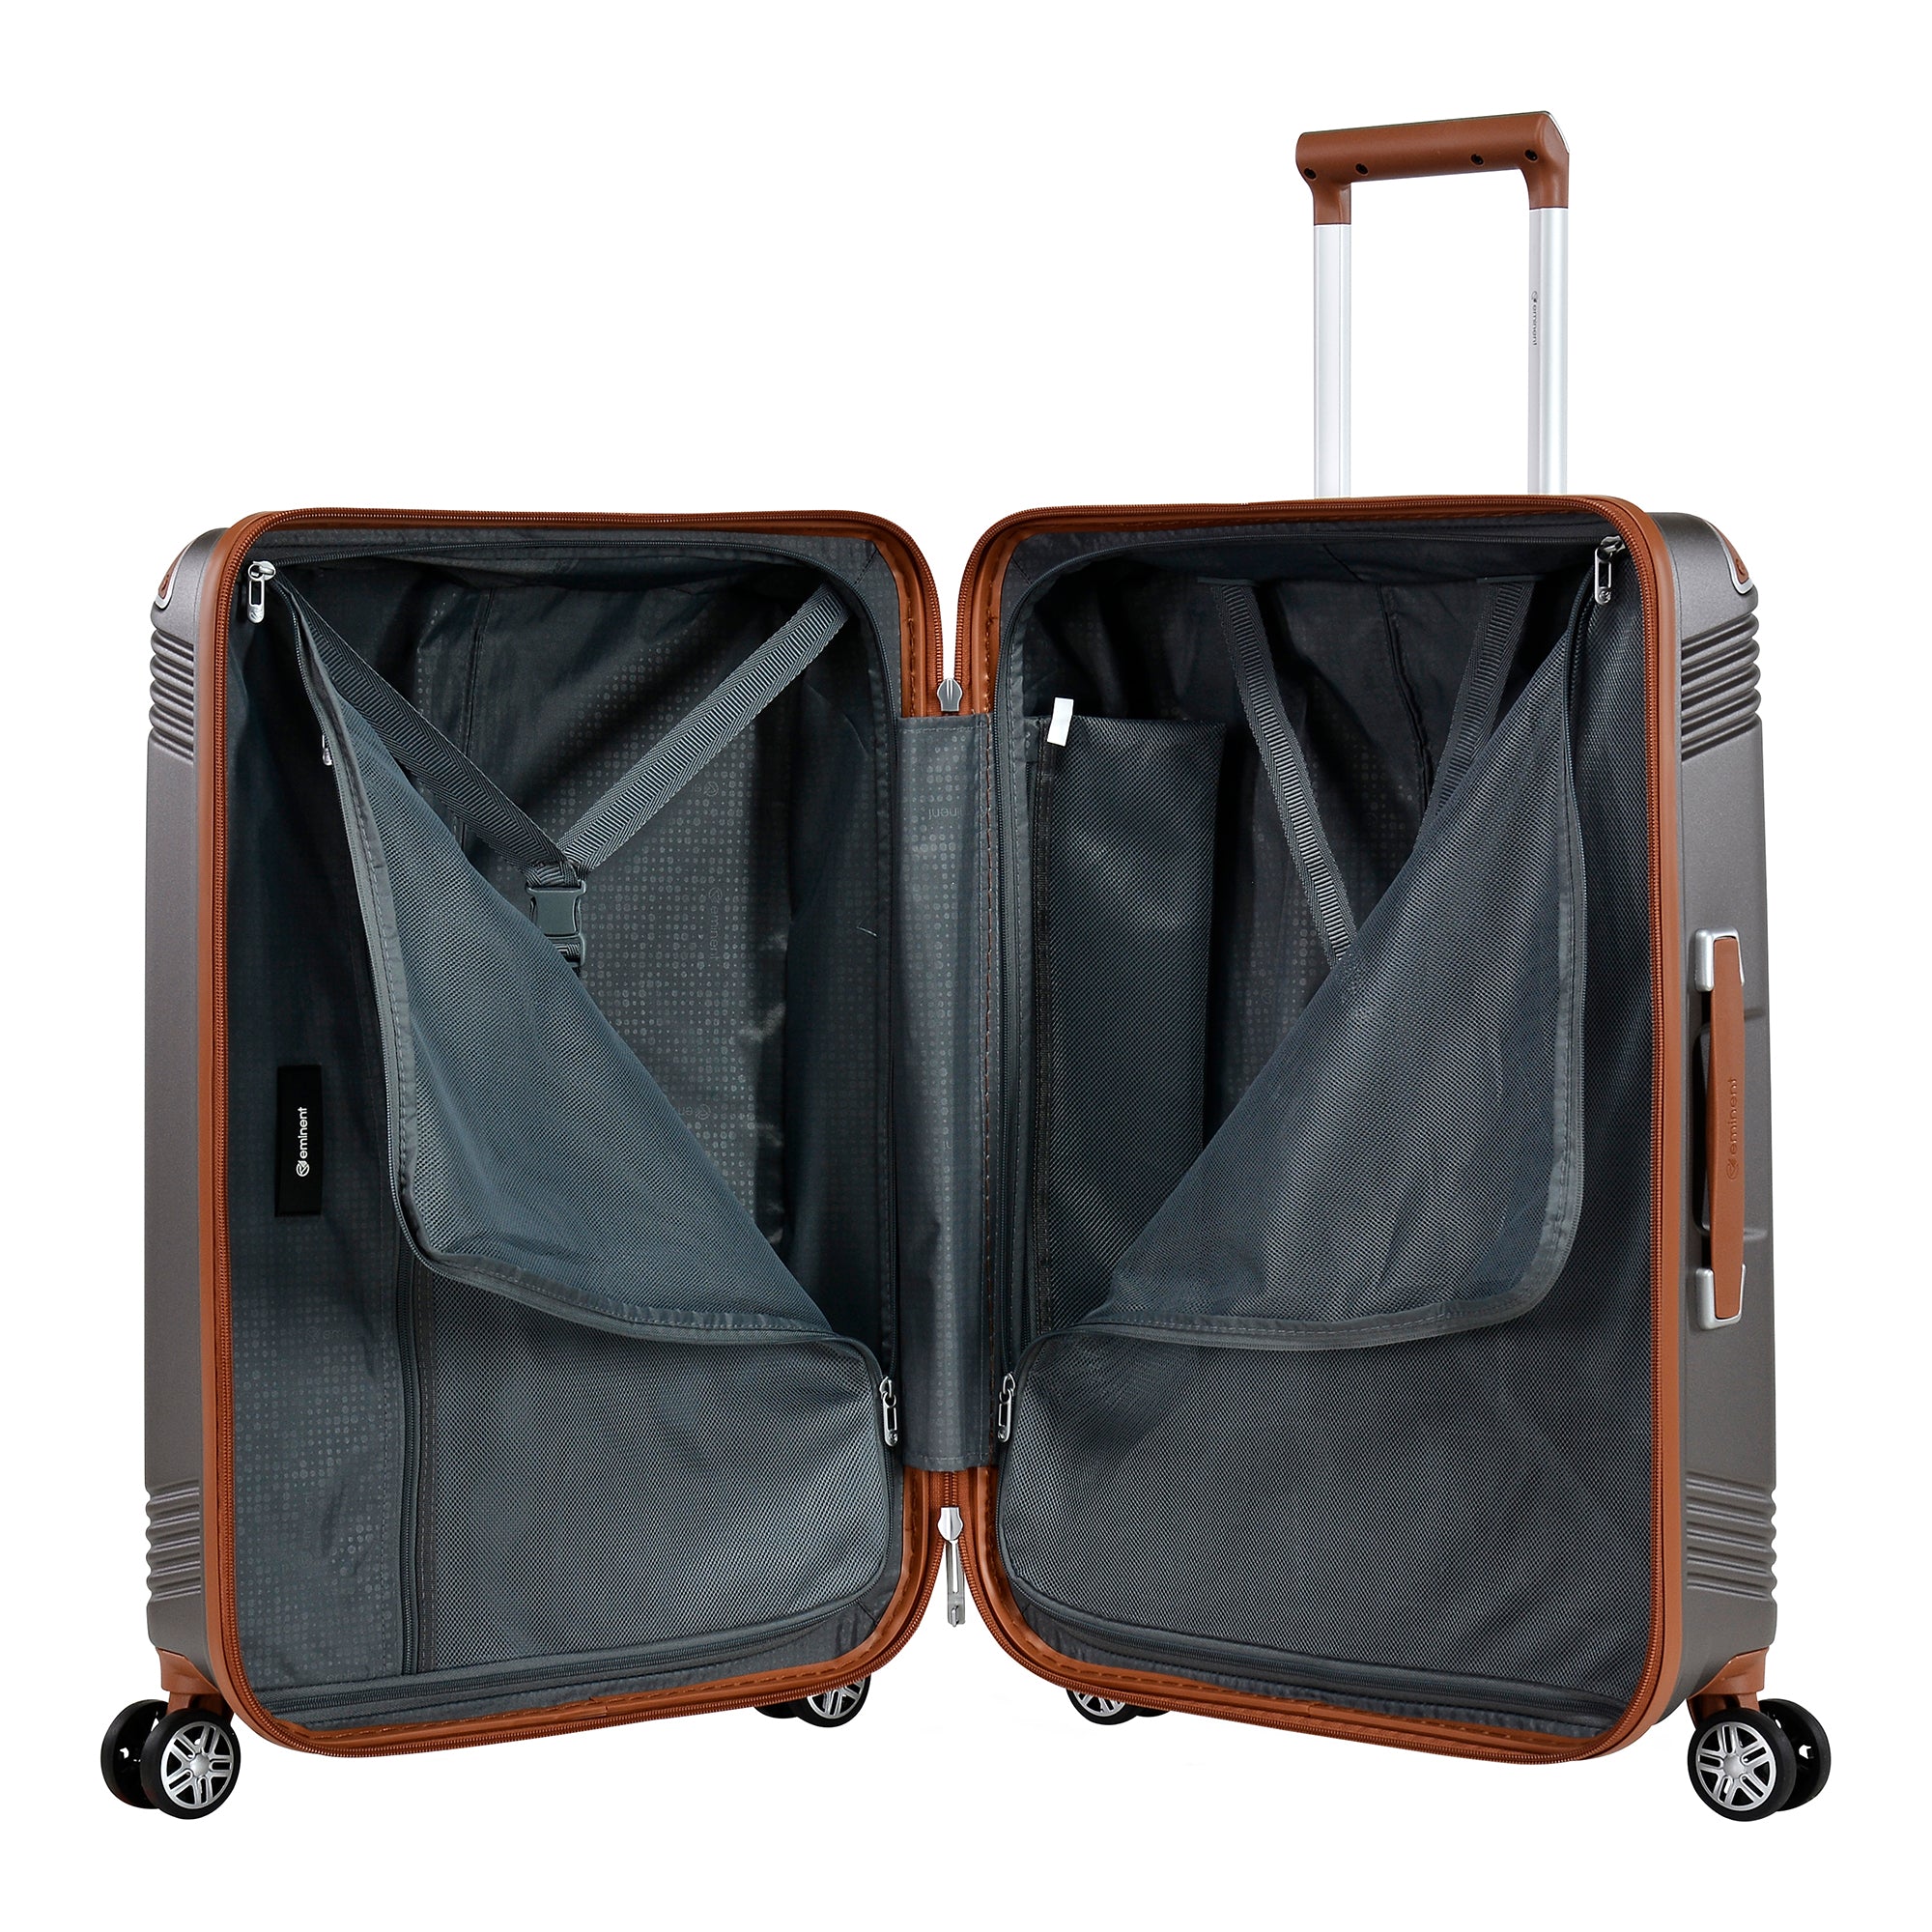 Eminent Makrolon Fashion Trolley Checked Luggage with TSA Approved Combination Lock and 4 Quite 360° double spinner wheels, KK10-24